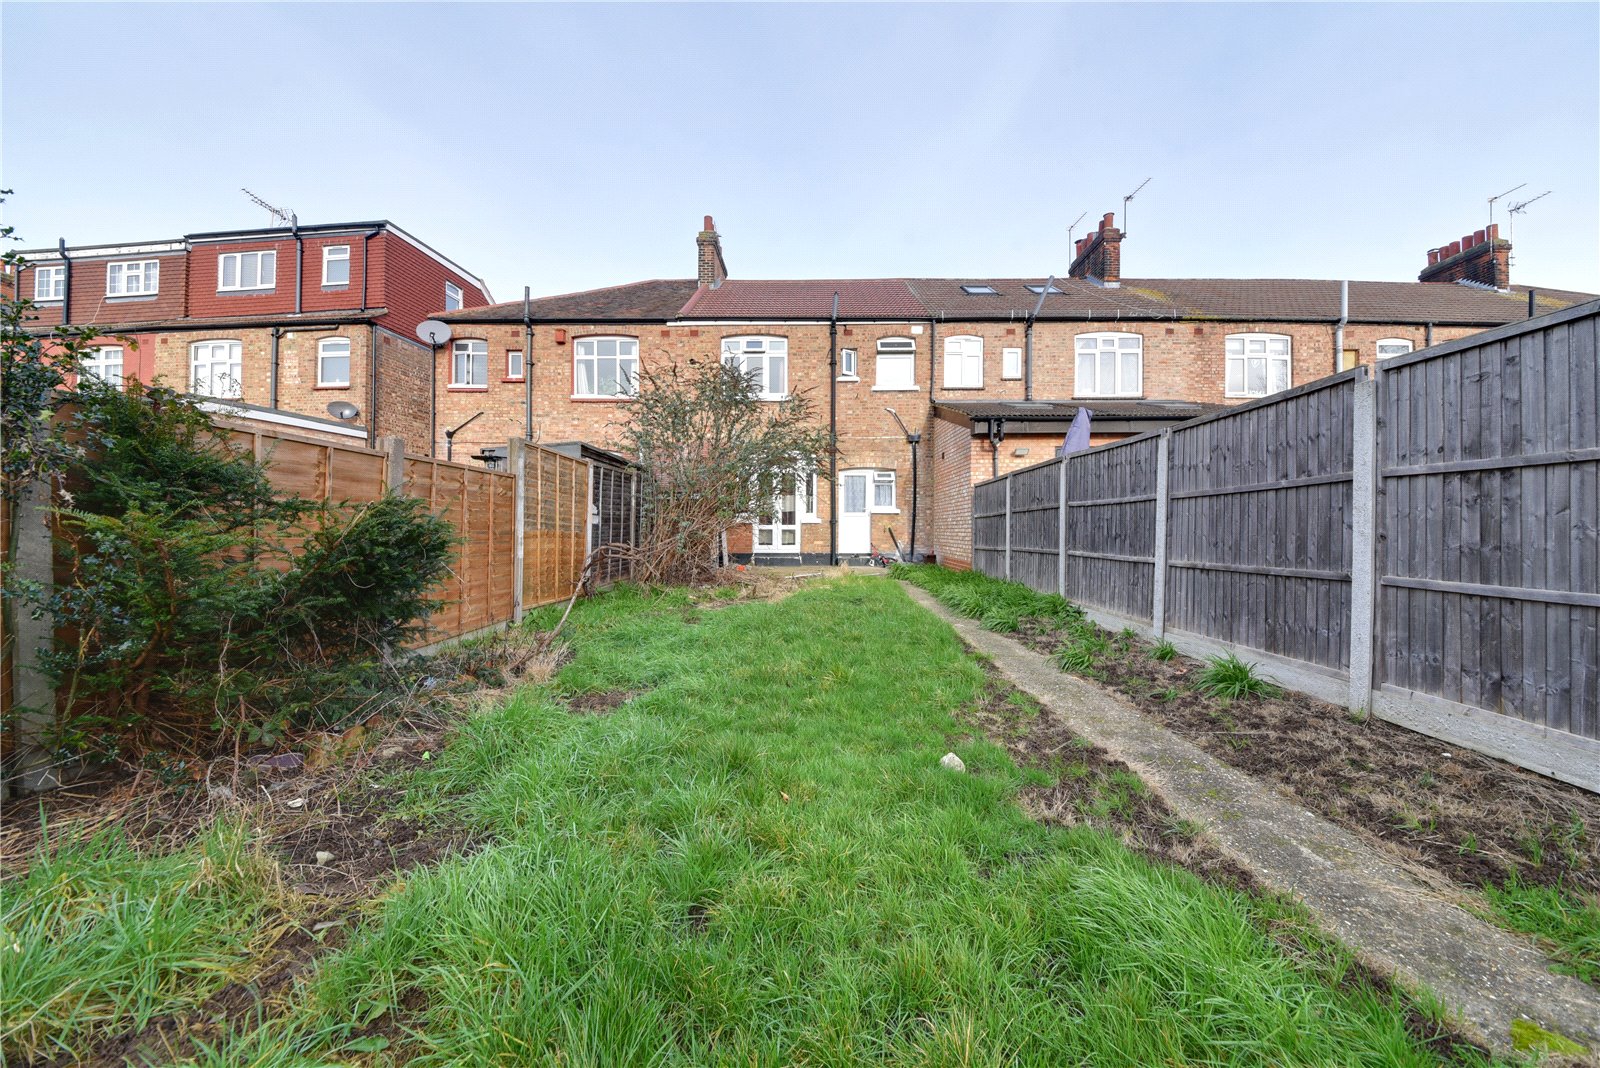 3 bed house for sale in Ridge Road, Winchmore Hill  - Property Image 4